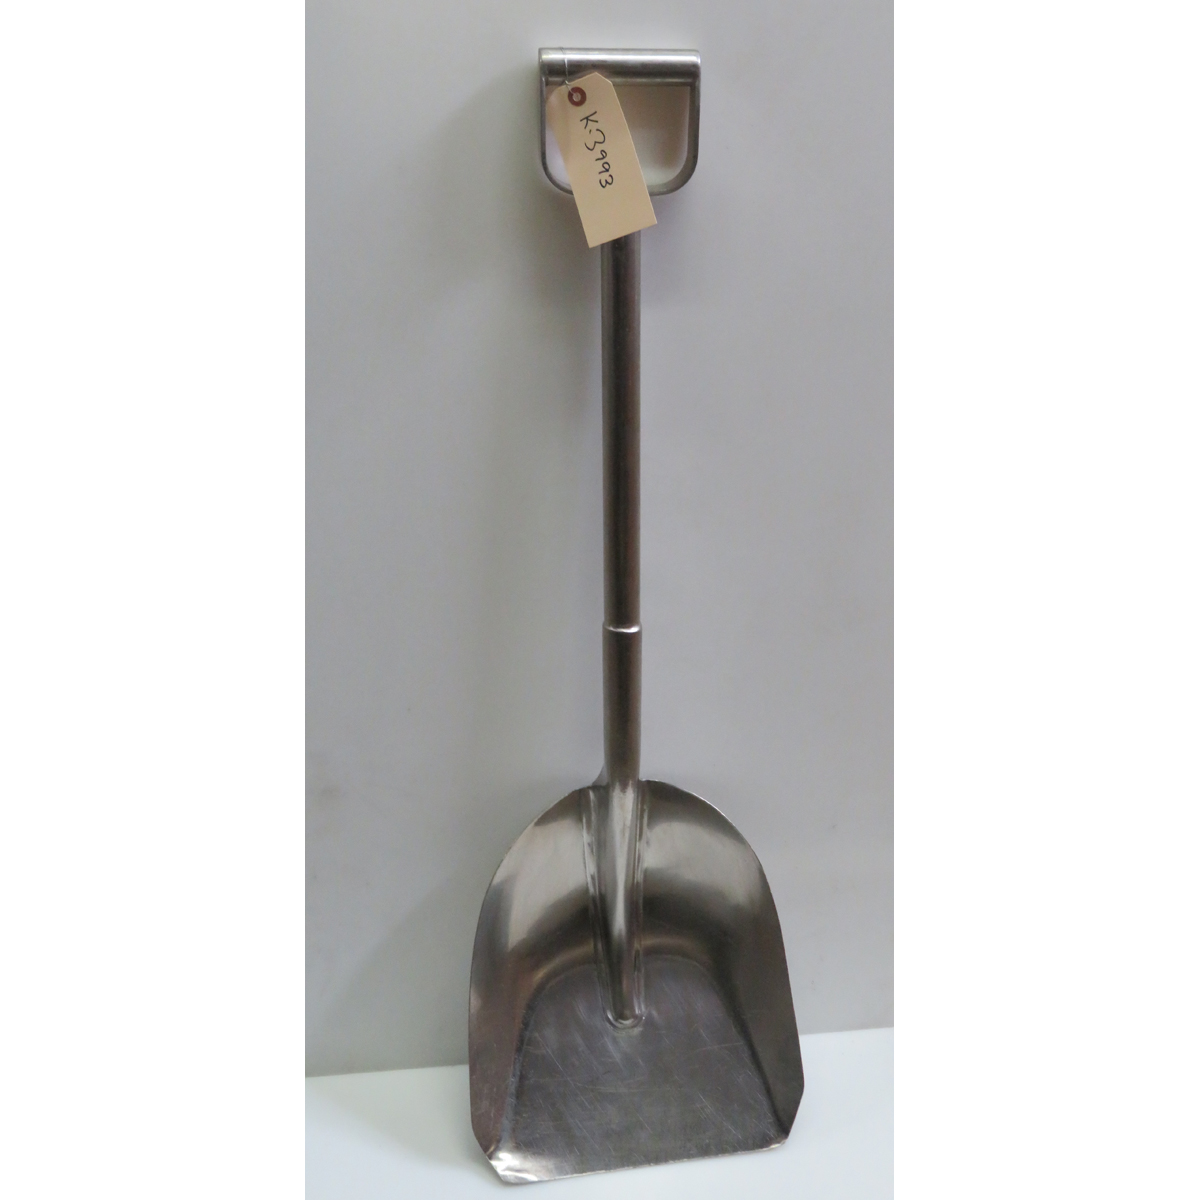 Stainless Steel Shovel 39", Used Very Good Condition